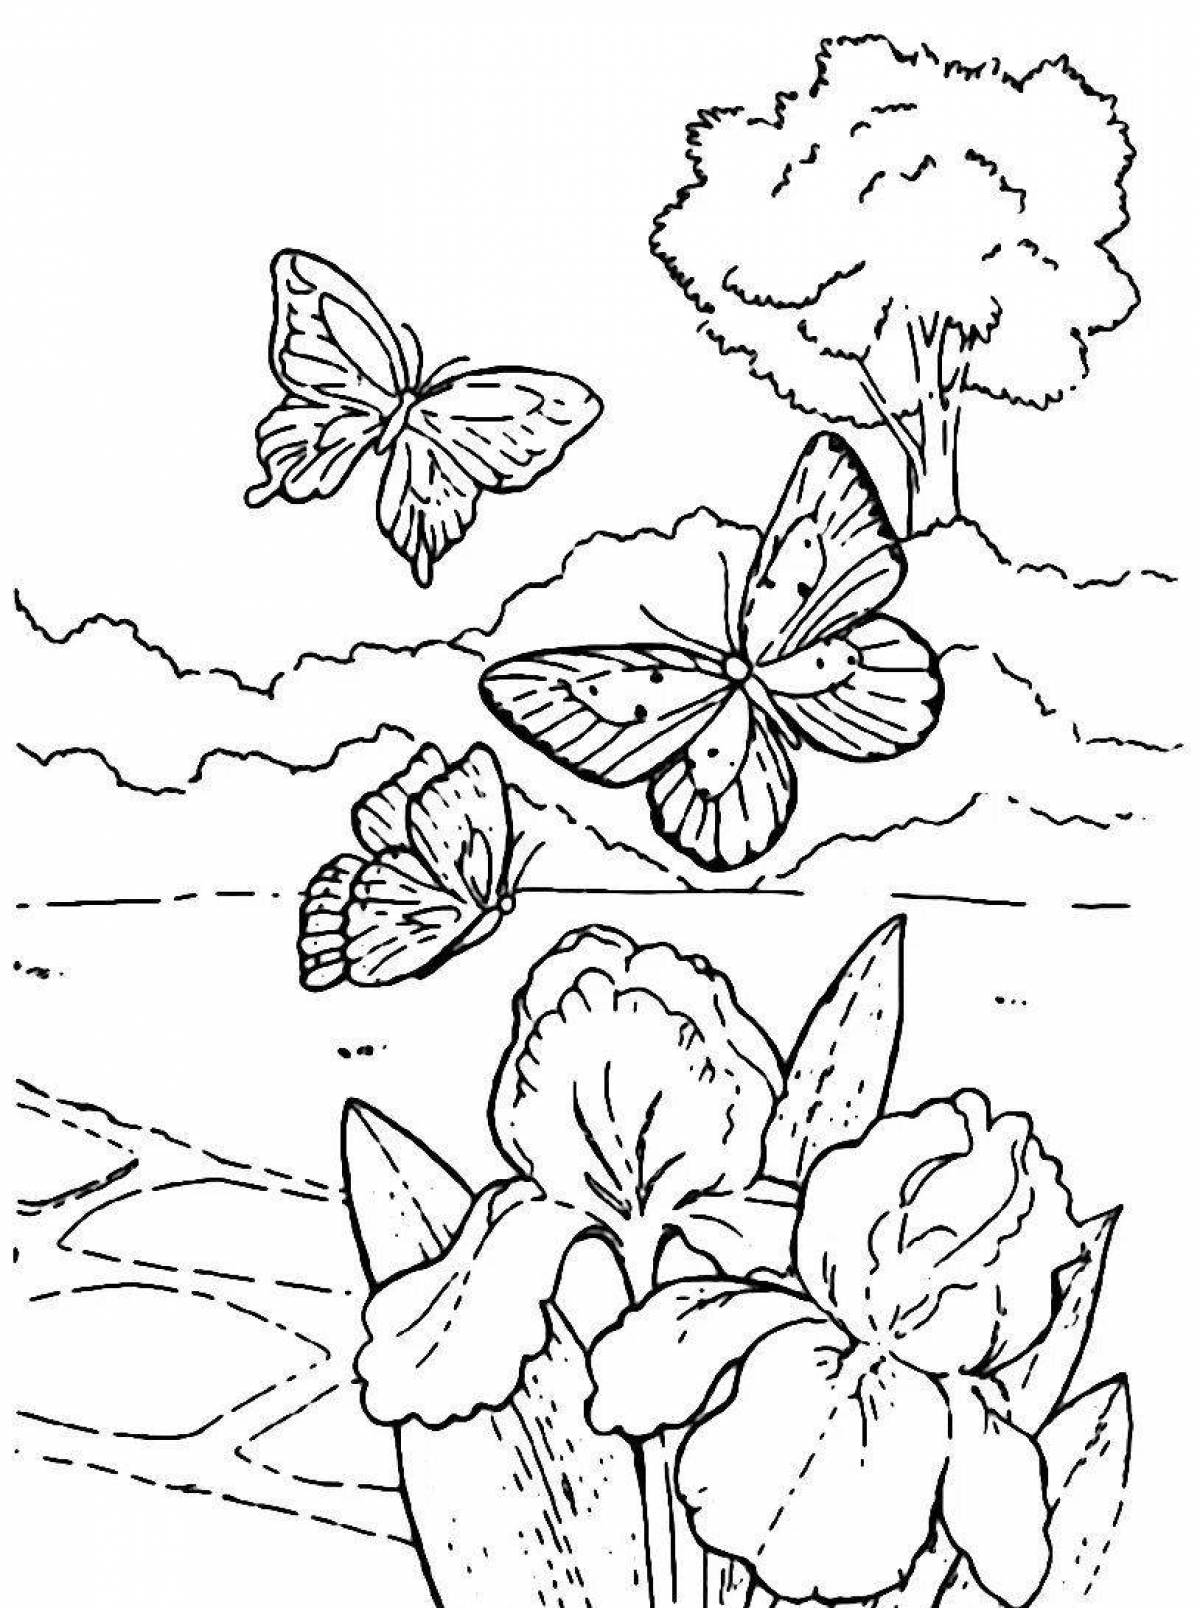 Majestic nature coloring book for 7-8 year olds